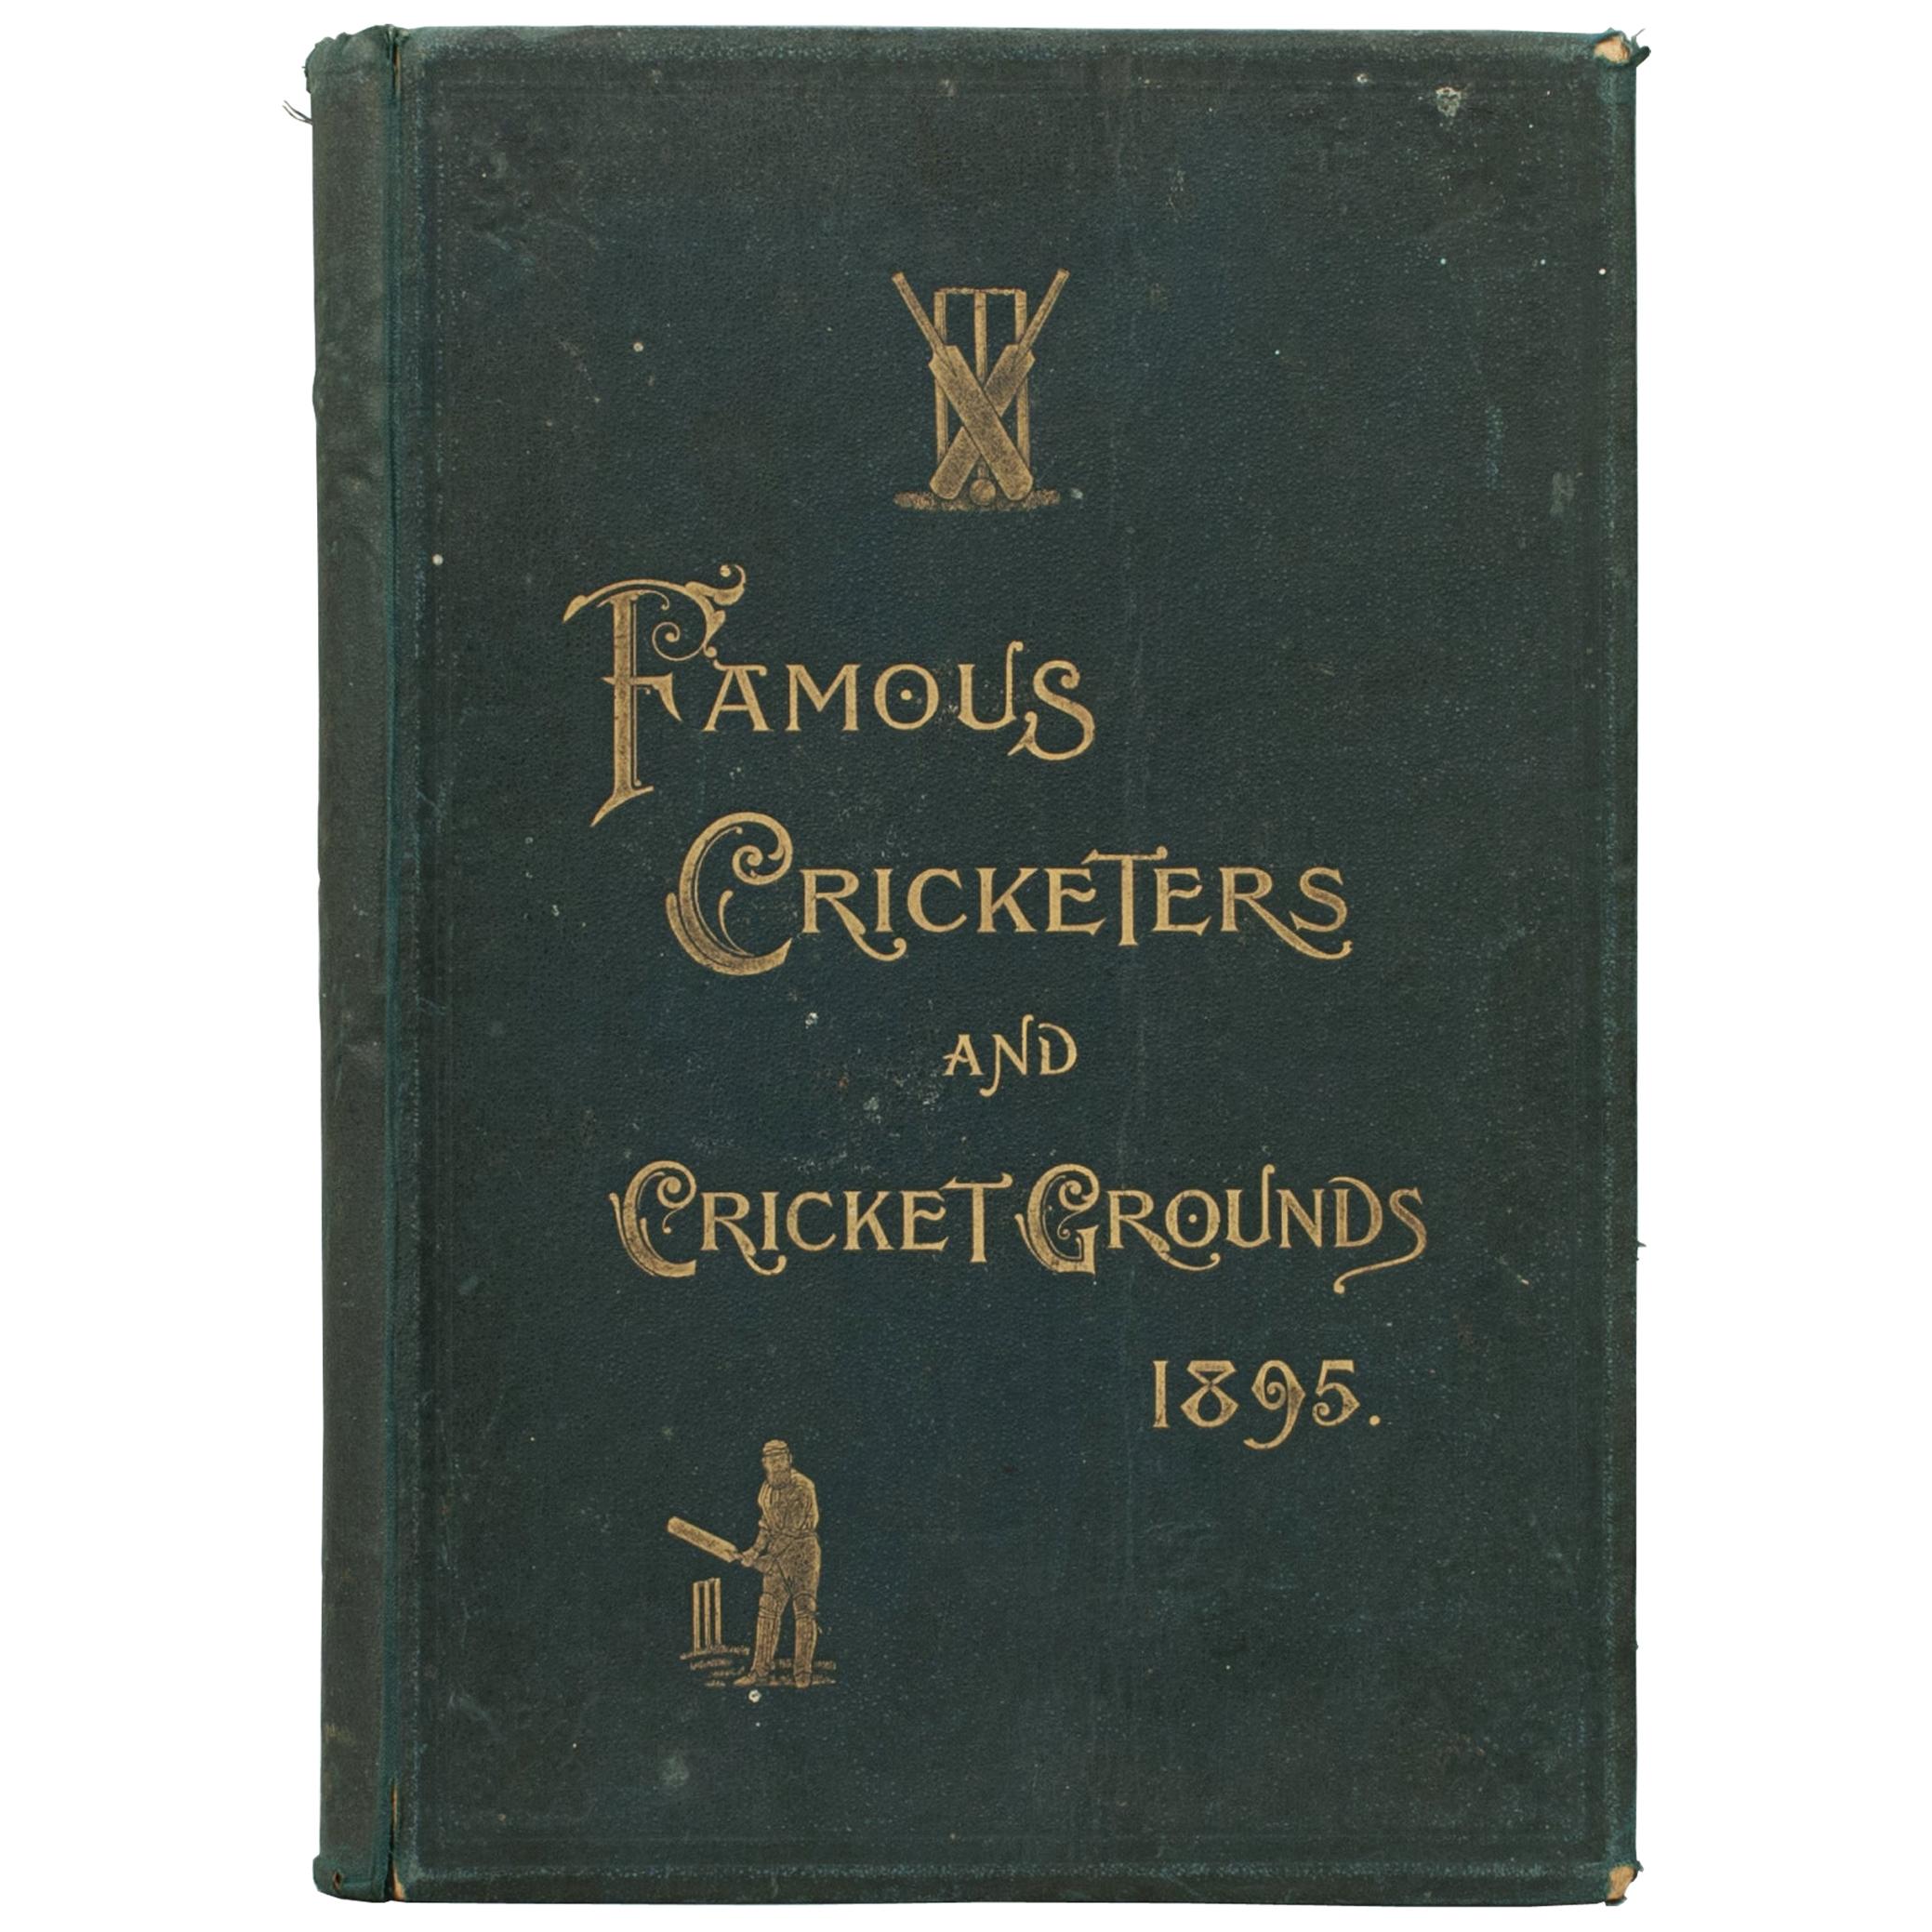 Cricket Book, Famous Cricketers and Cricket Grounds, 1895